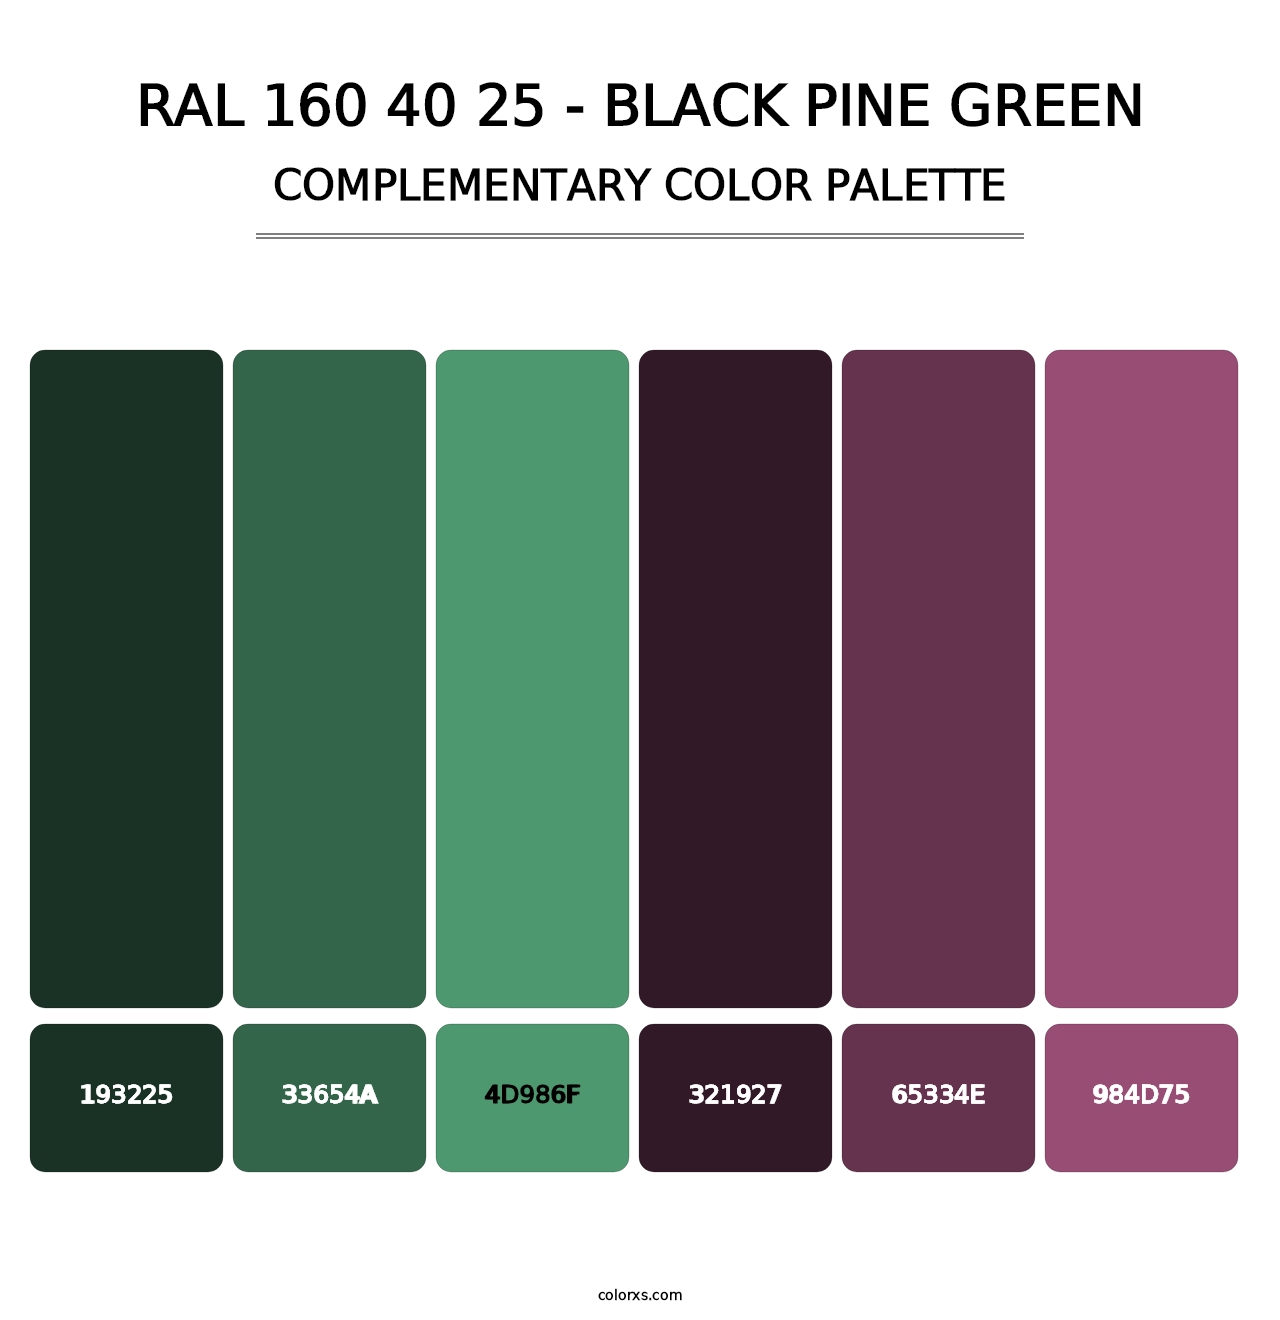 RAL 160 40 25 - Black Pine Green - Complementary Color Palette